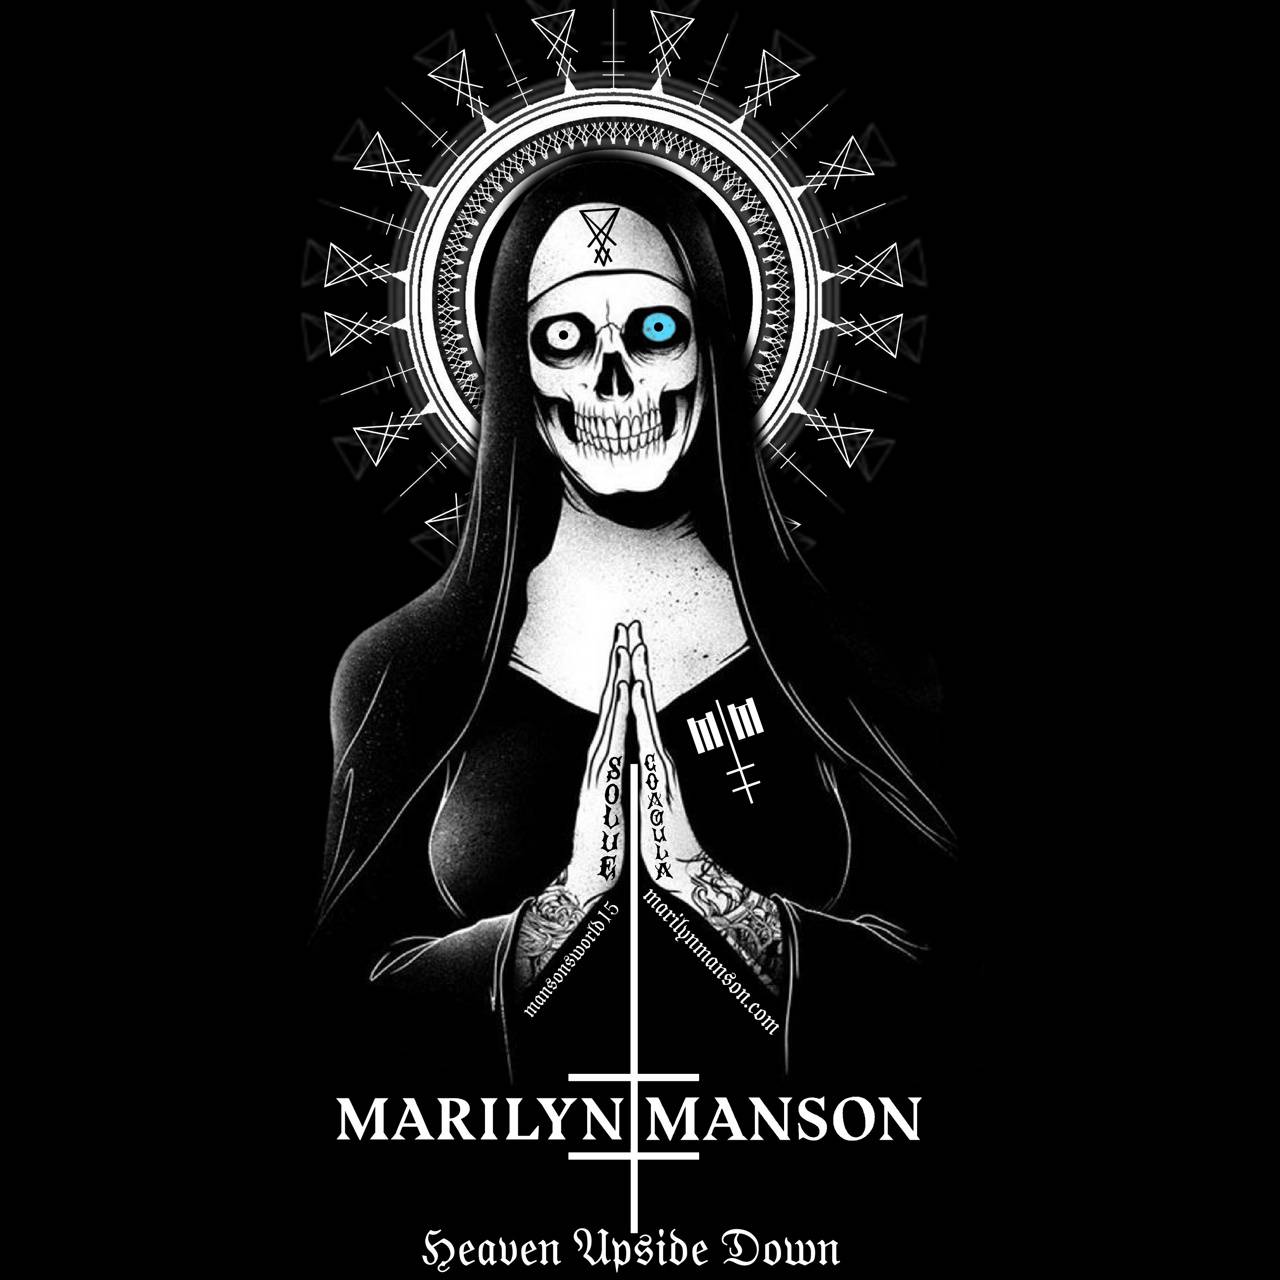 Marilyn Manson Iphone Wallpapers